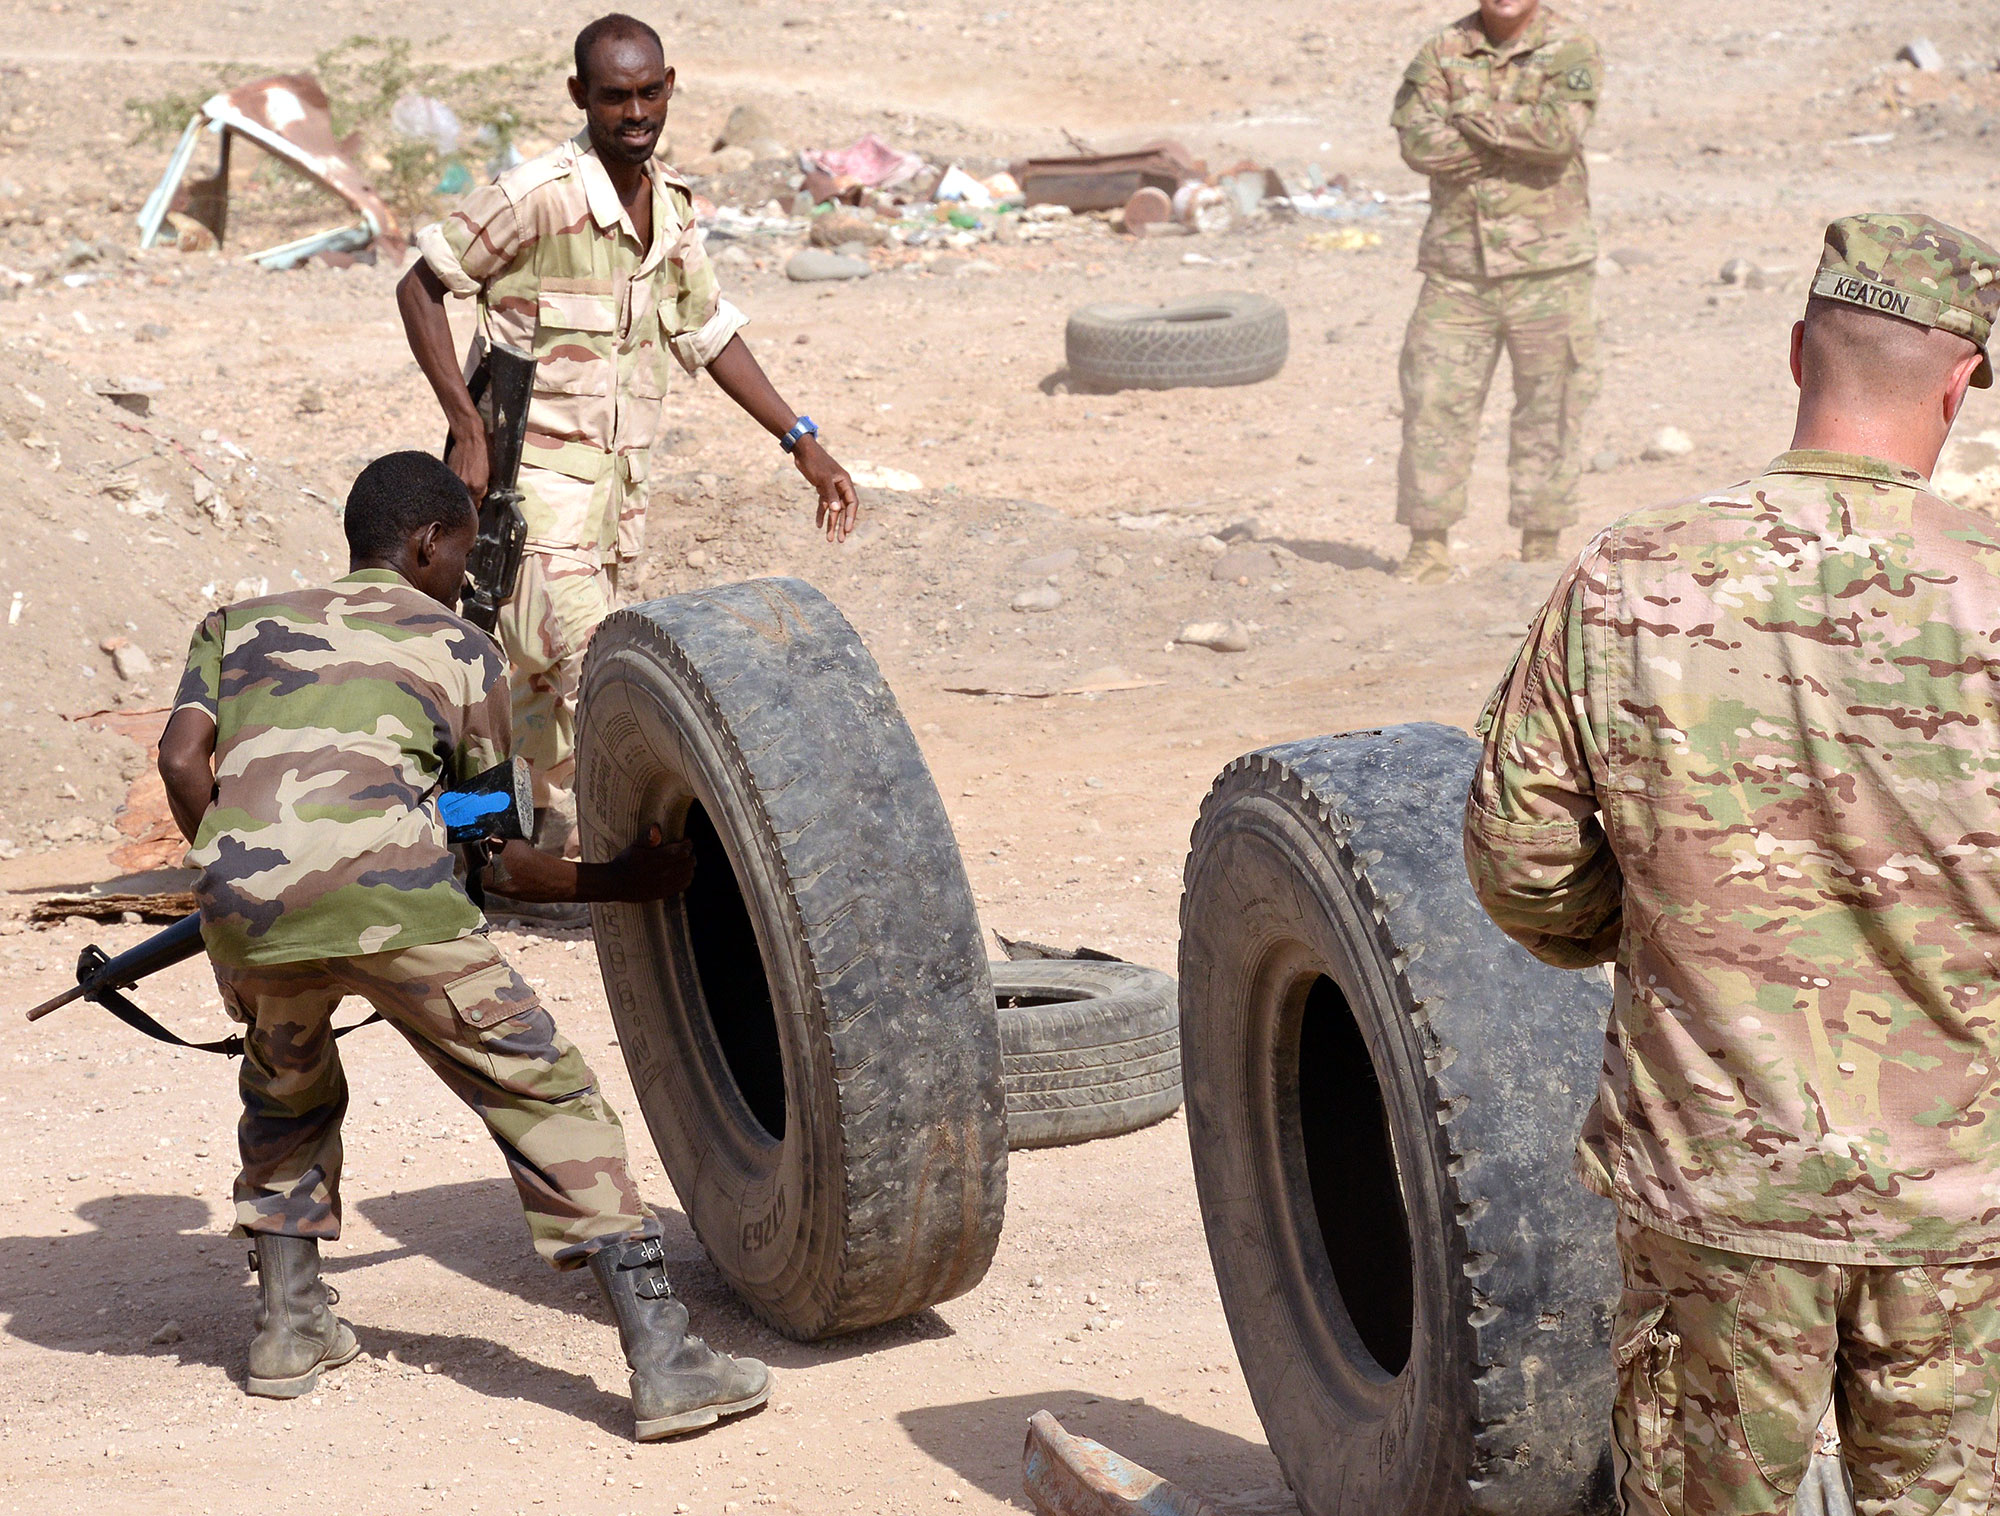 As Staff Sgt. Richard Keaton and other U.S. Army Soldiers look on, members of the Djiboutian army go through an exercise on dealing with roadblocks.